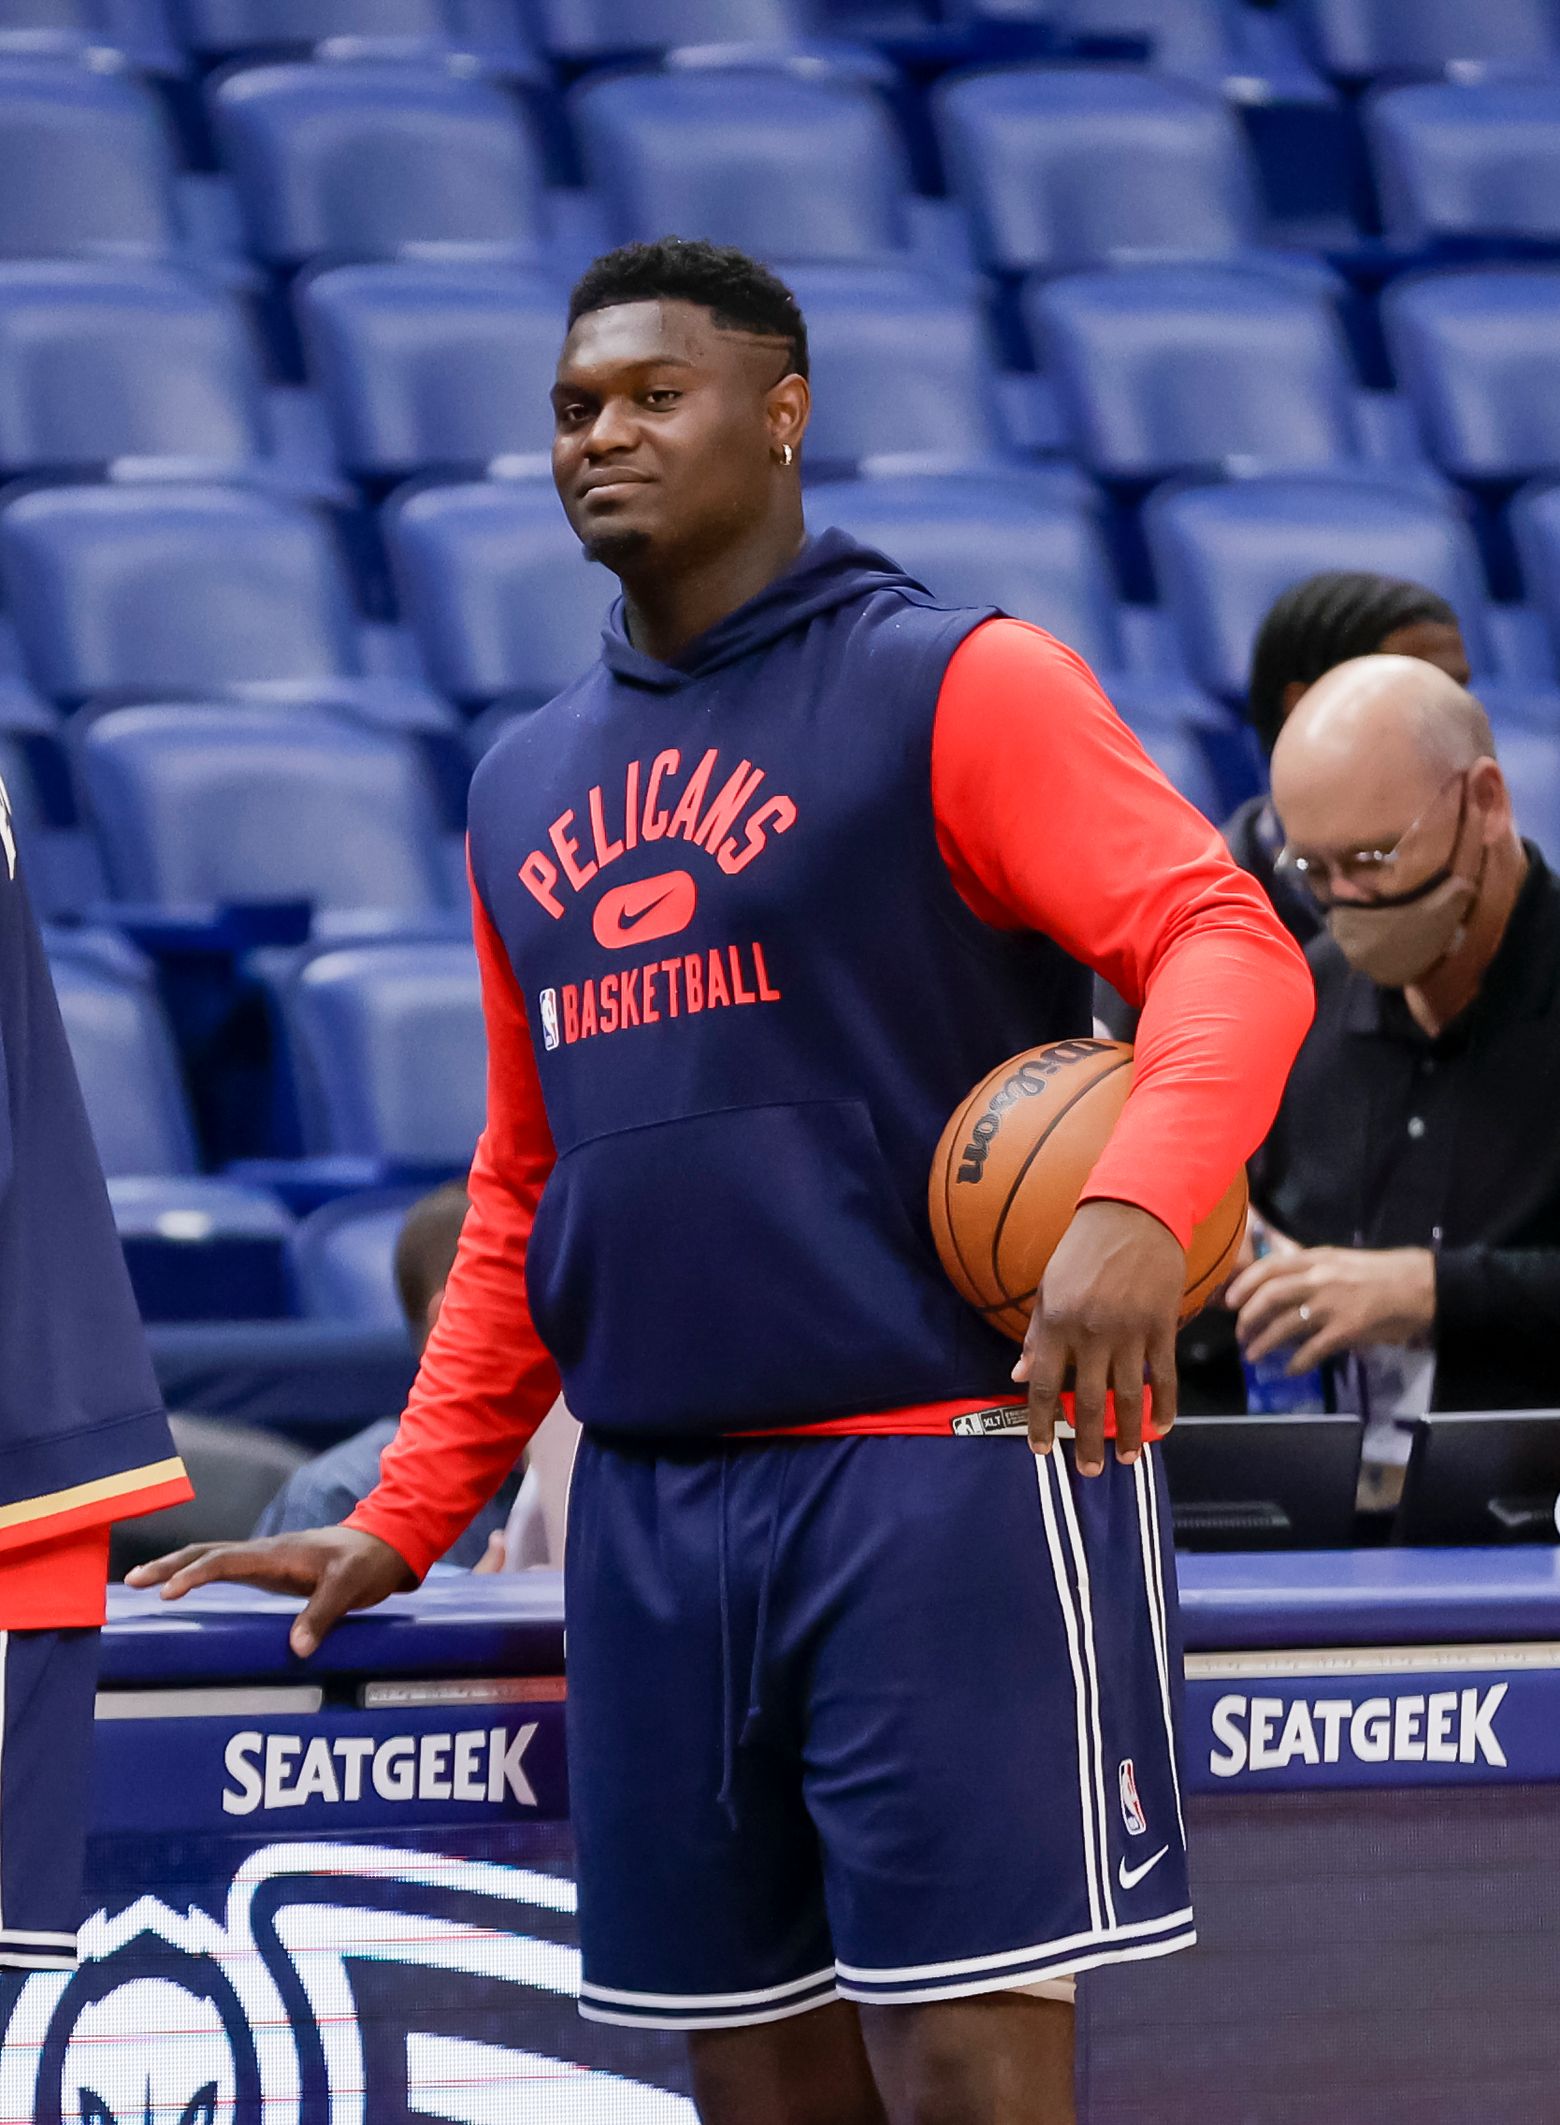 A healthy Zion Williamson is a boon for the Pelicans (and the NBA)